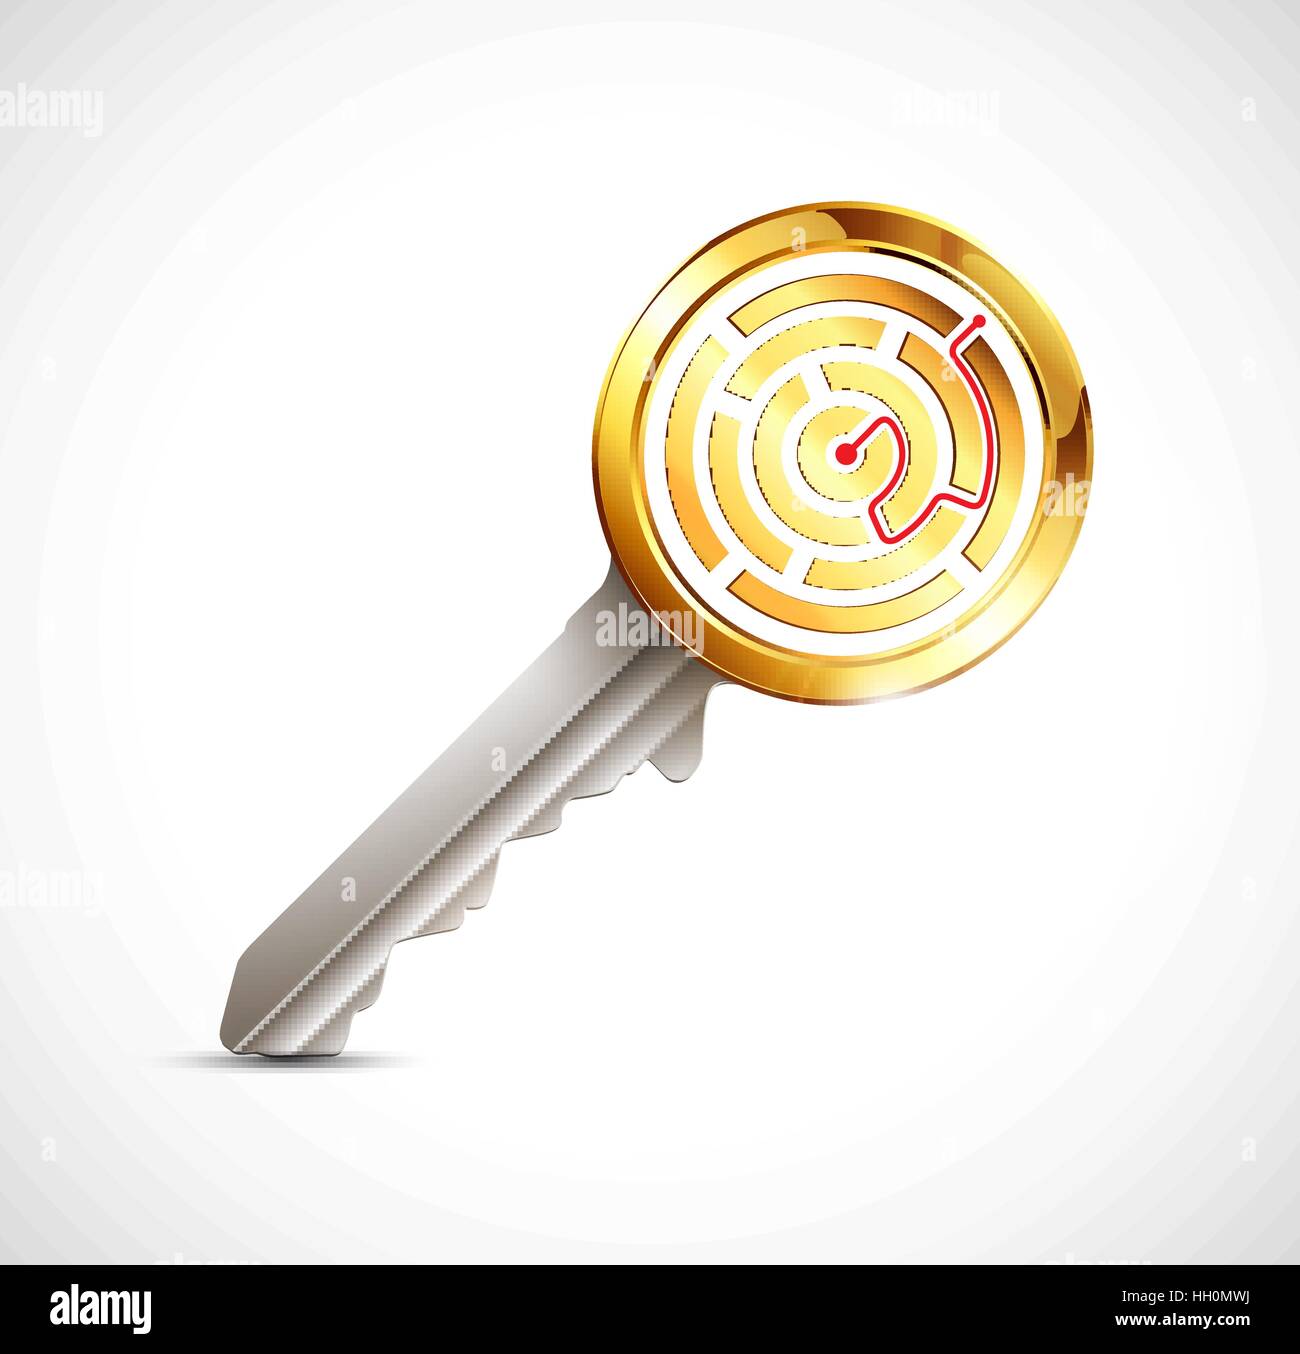 Key concept - key as business solutions - idea illustration Stock Vector